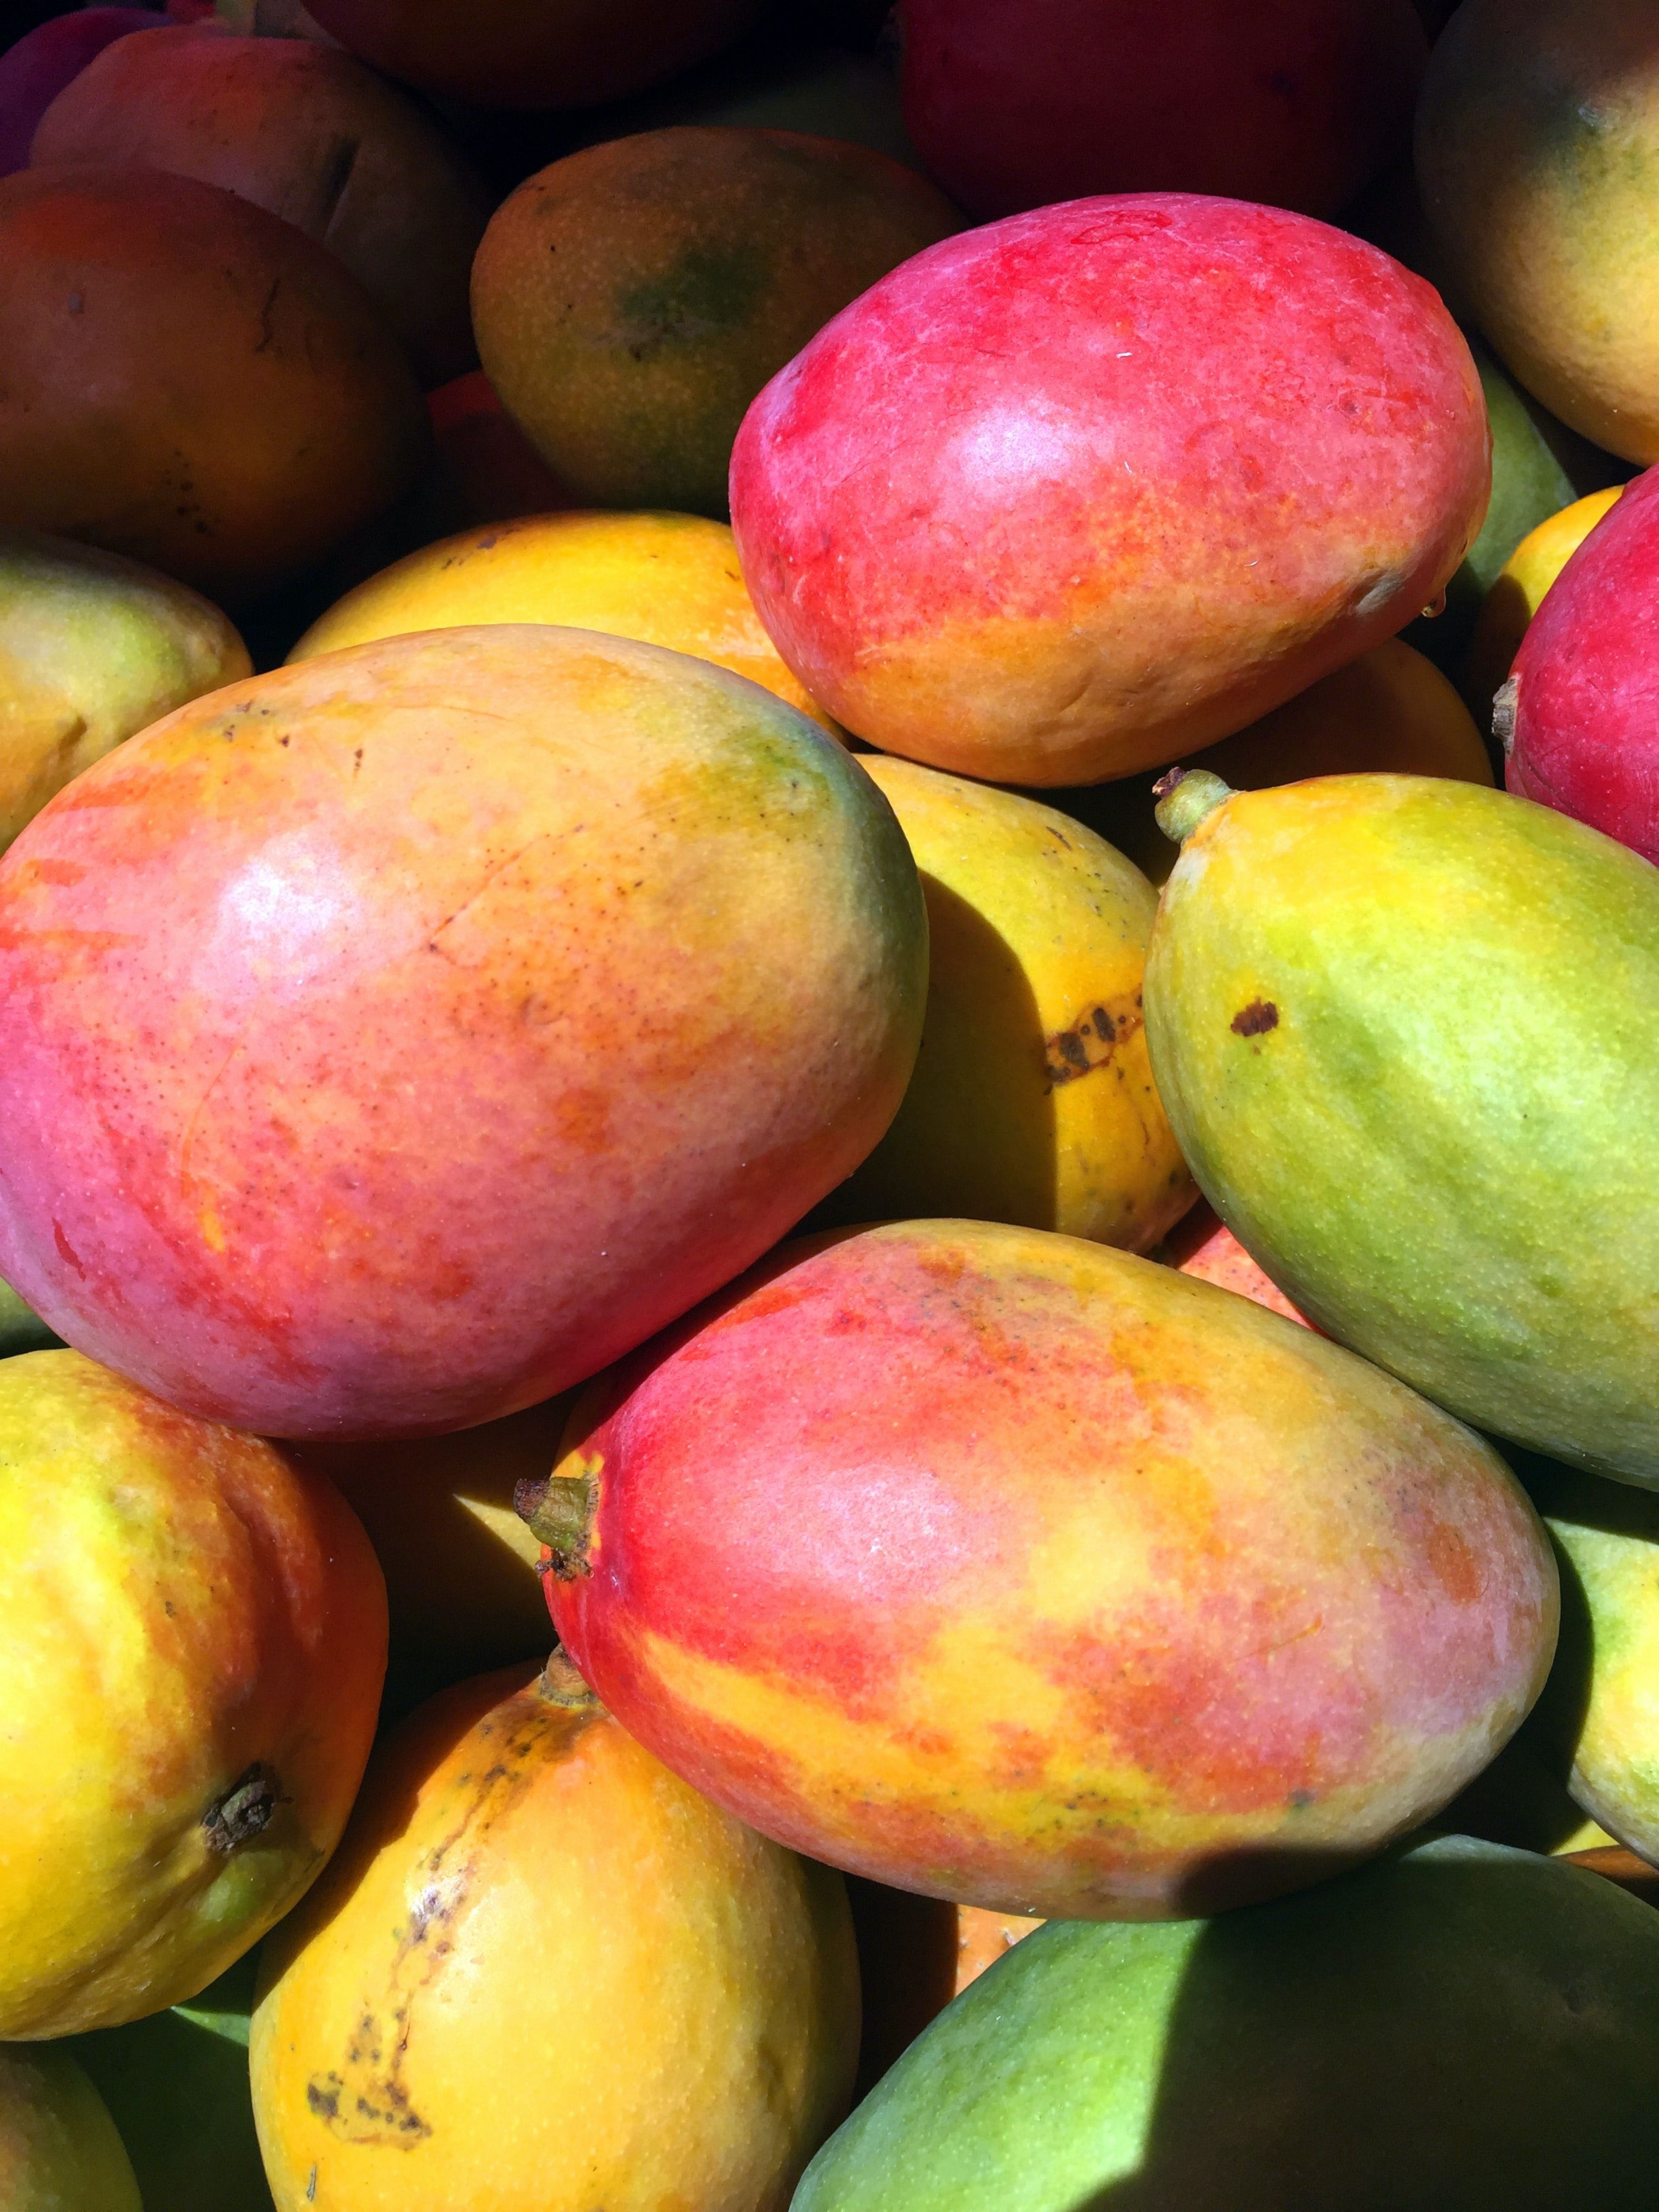 What good are Mangoes?